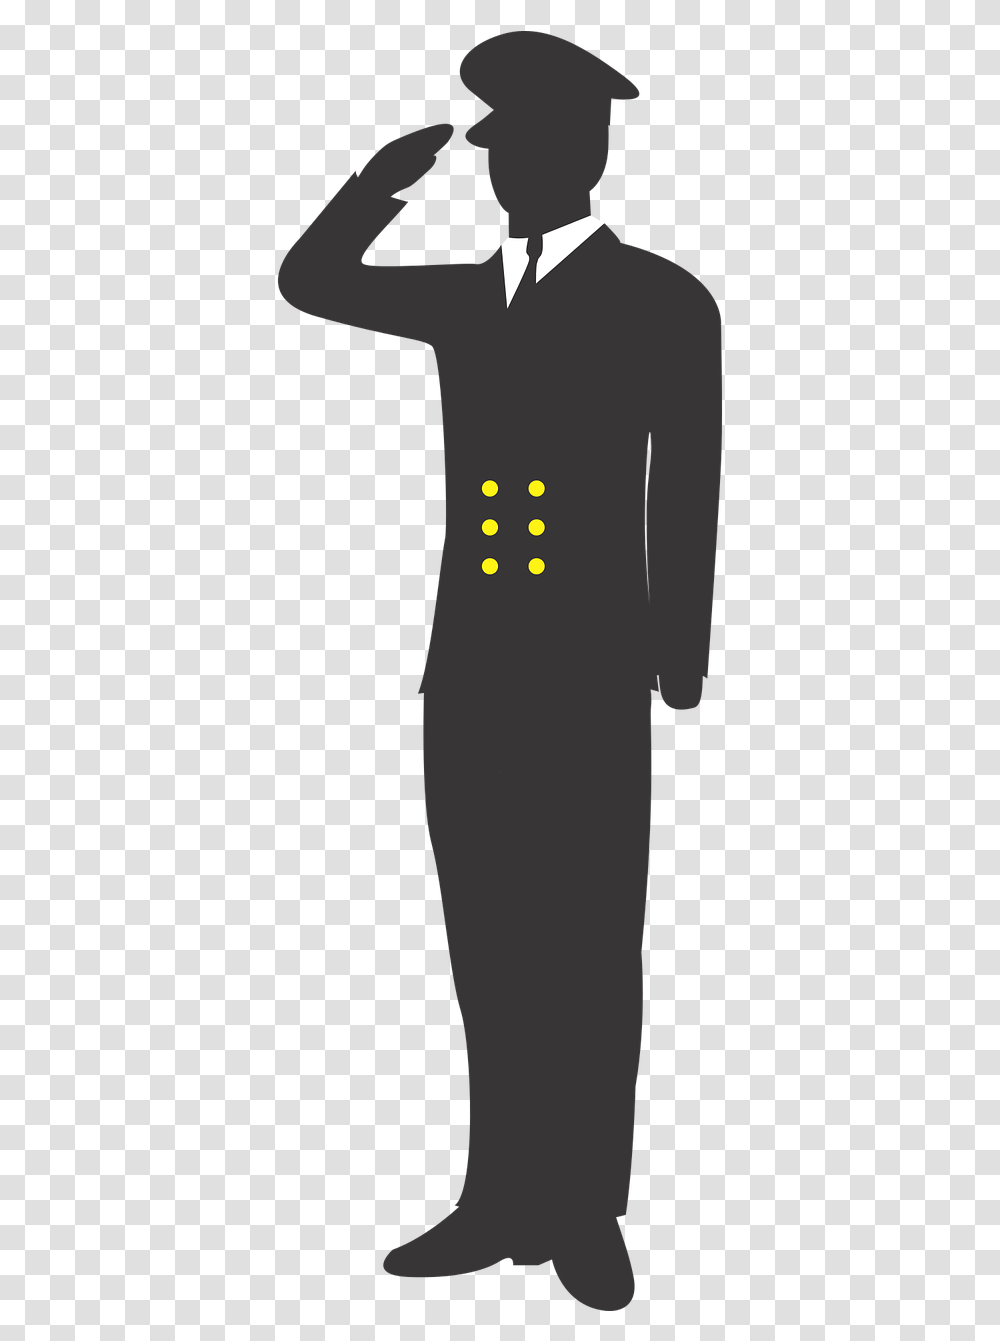 Sailor Salute Soldier Military Personnel Clip Art Soldiers Silhouette Salute, Sleeve, Overcoat, Light Transparent Png